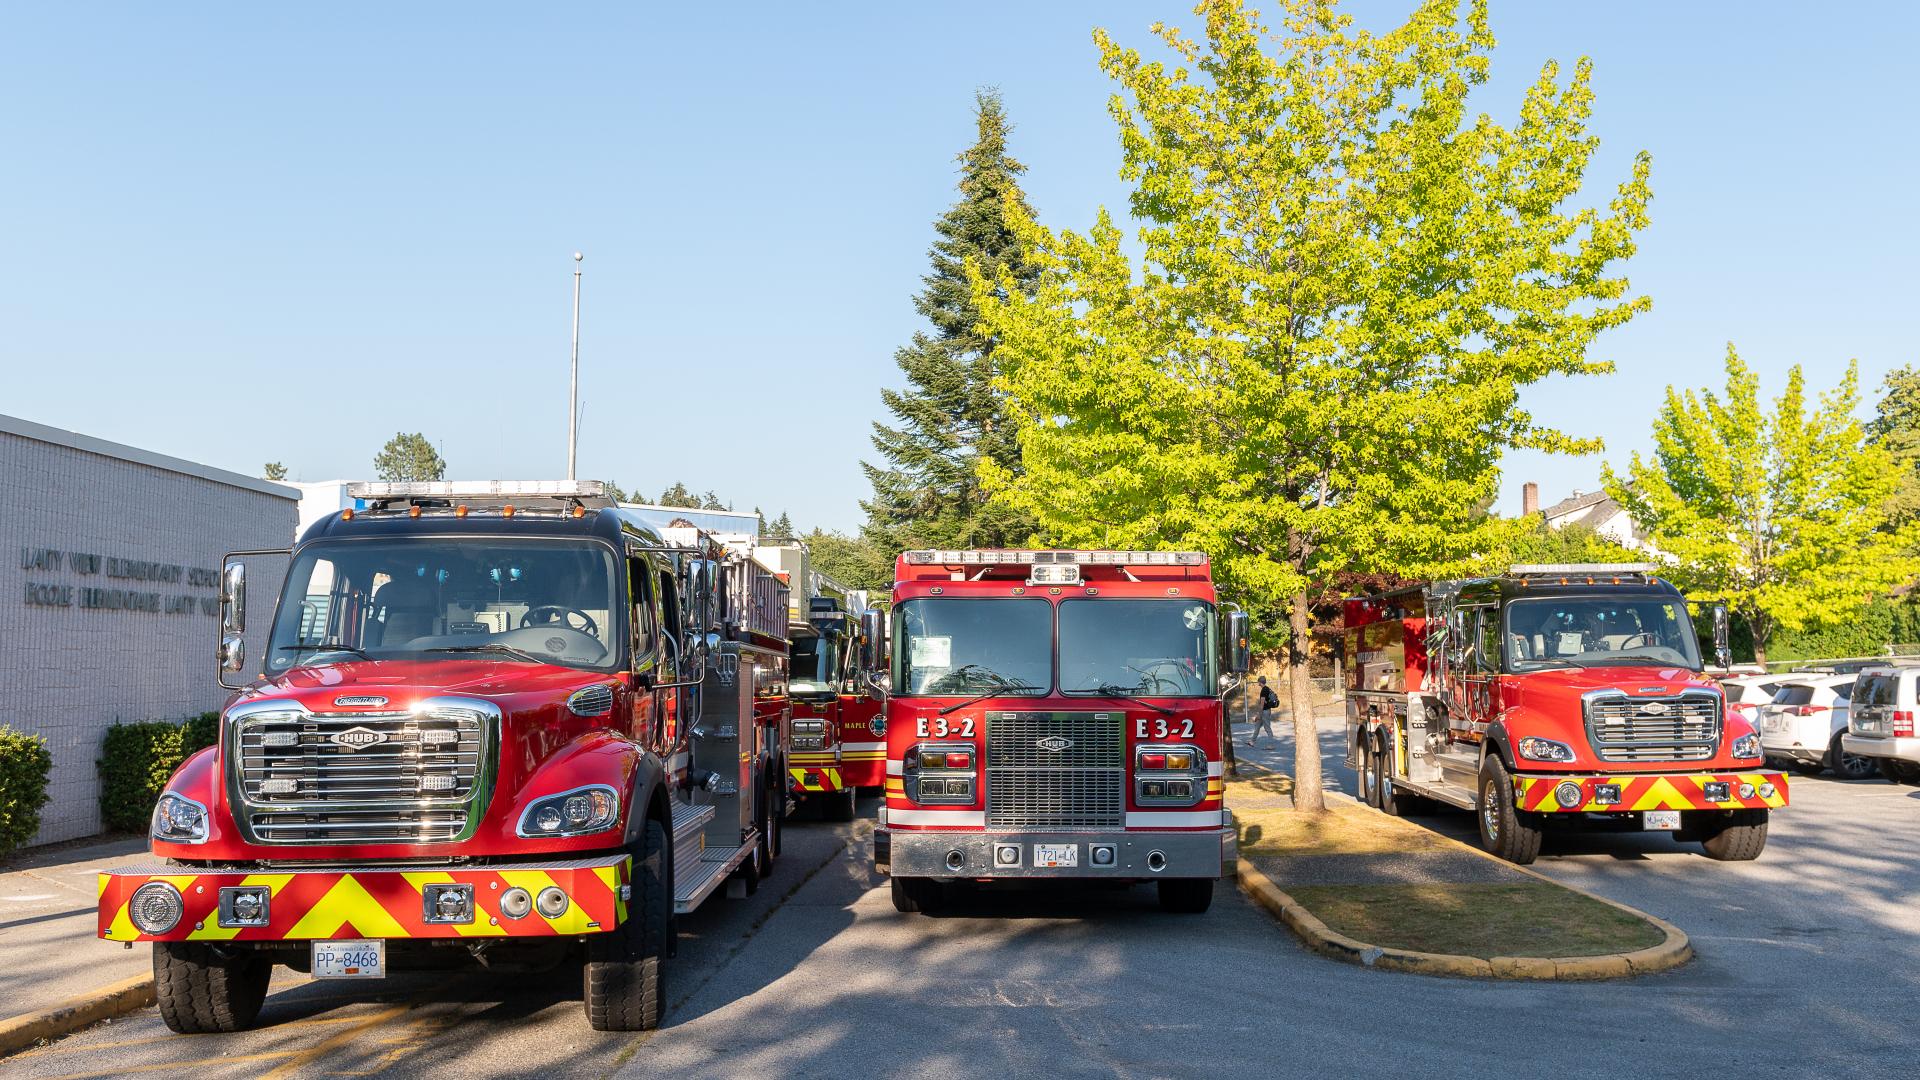 Three different varieties of fire trucks are parked on a street for display.